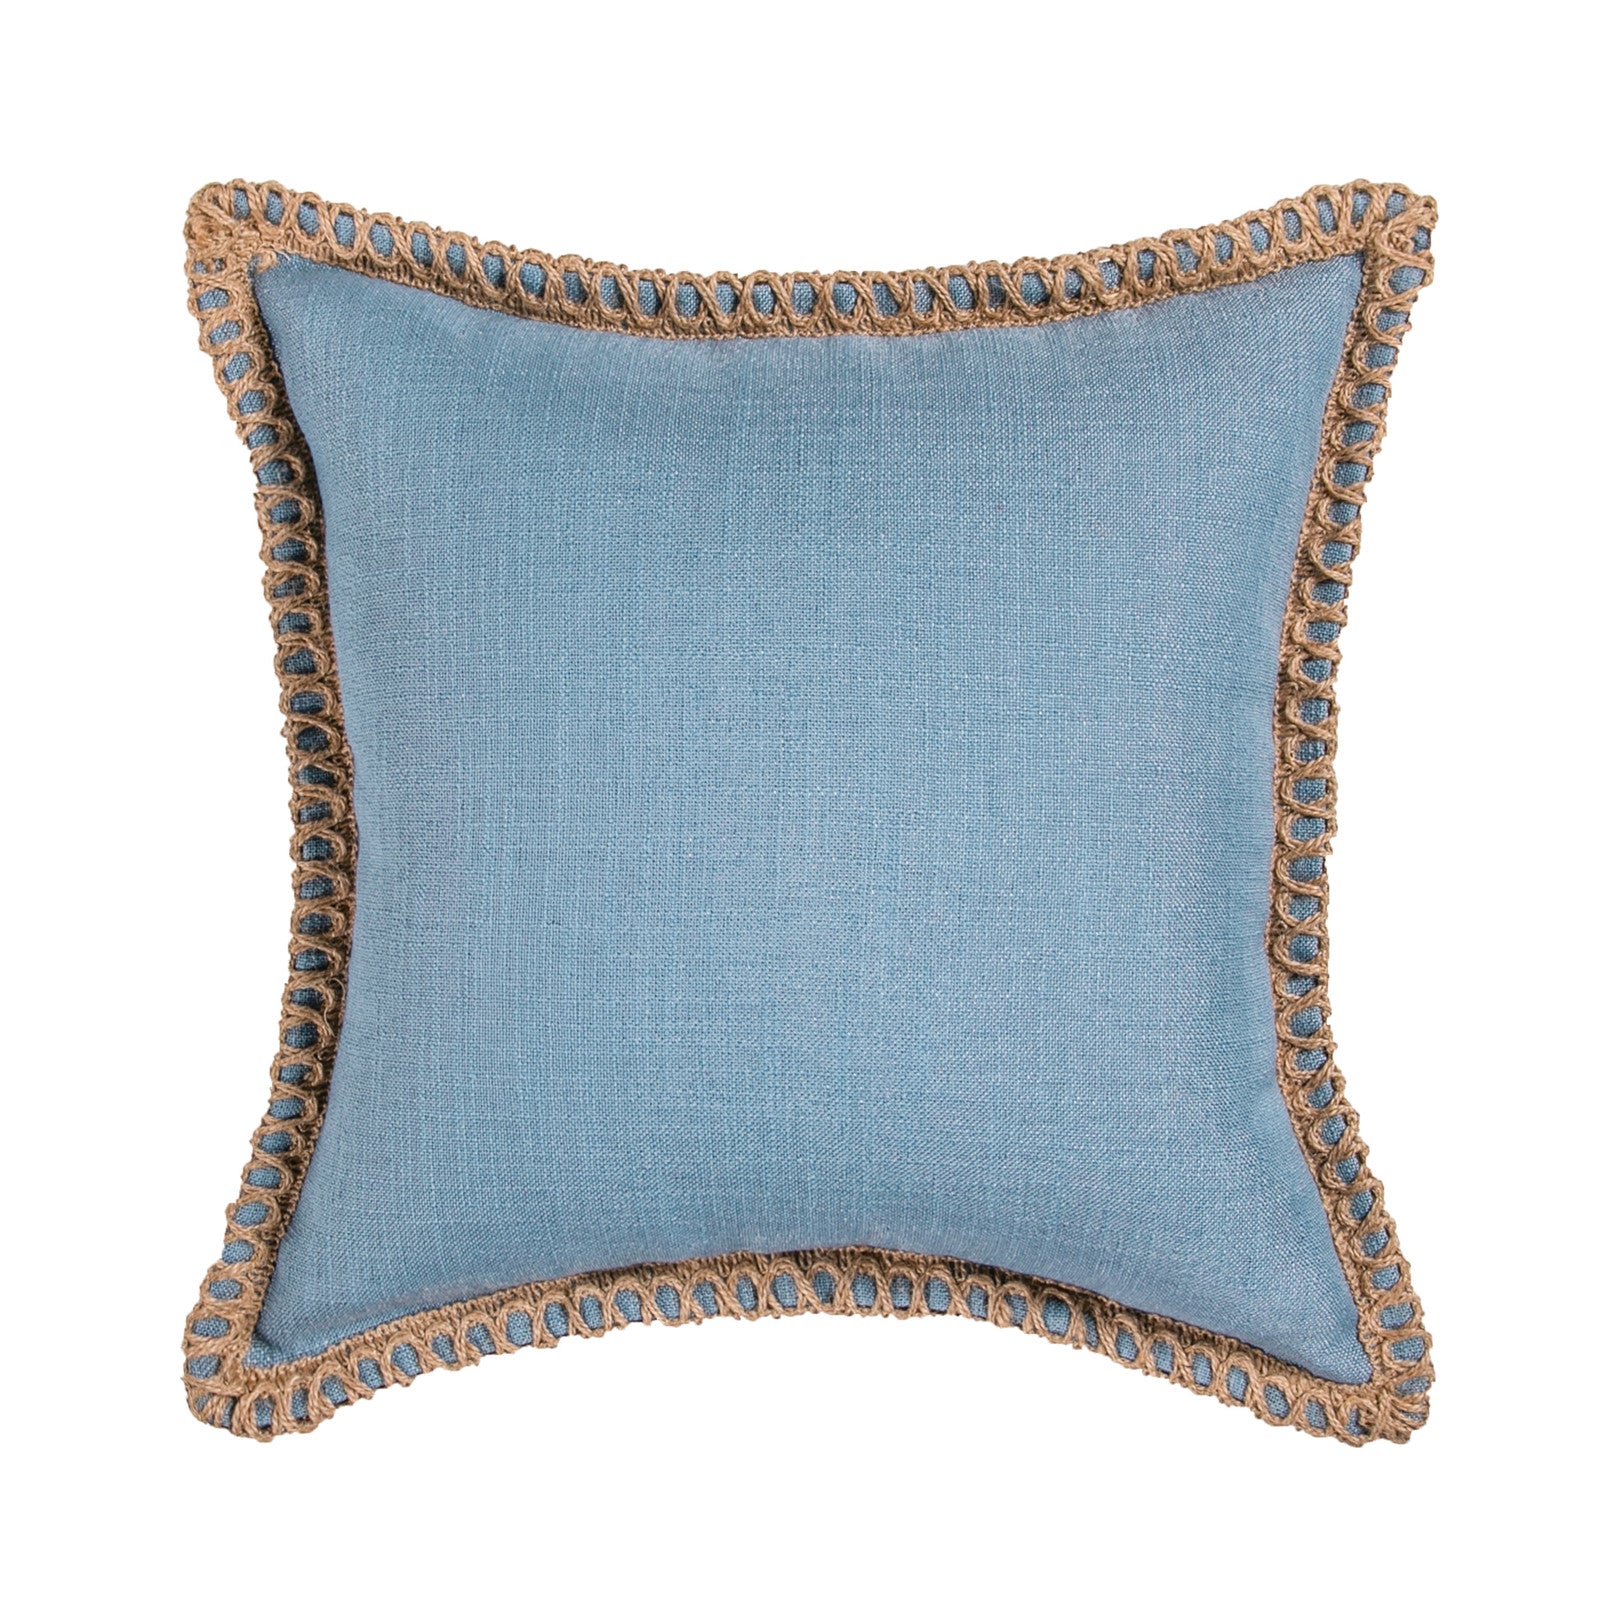 Linen Appearance With Sewn Hemp Rope On The Edge Breathable Pillow Cover